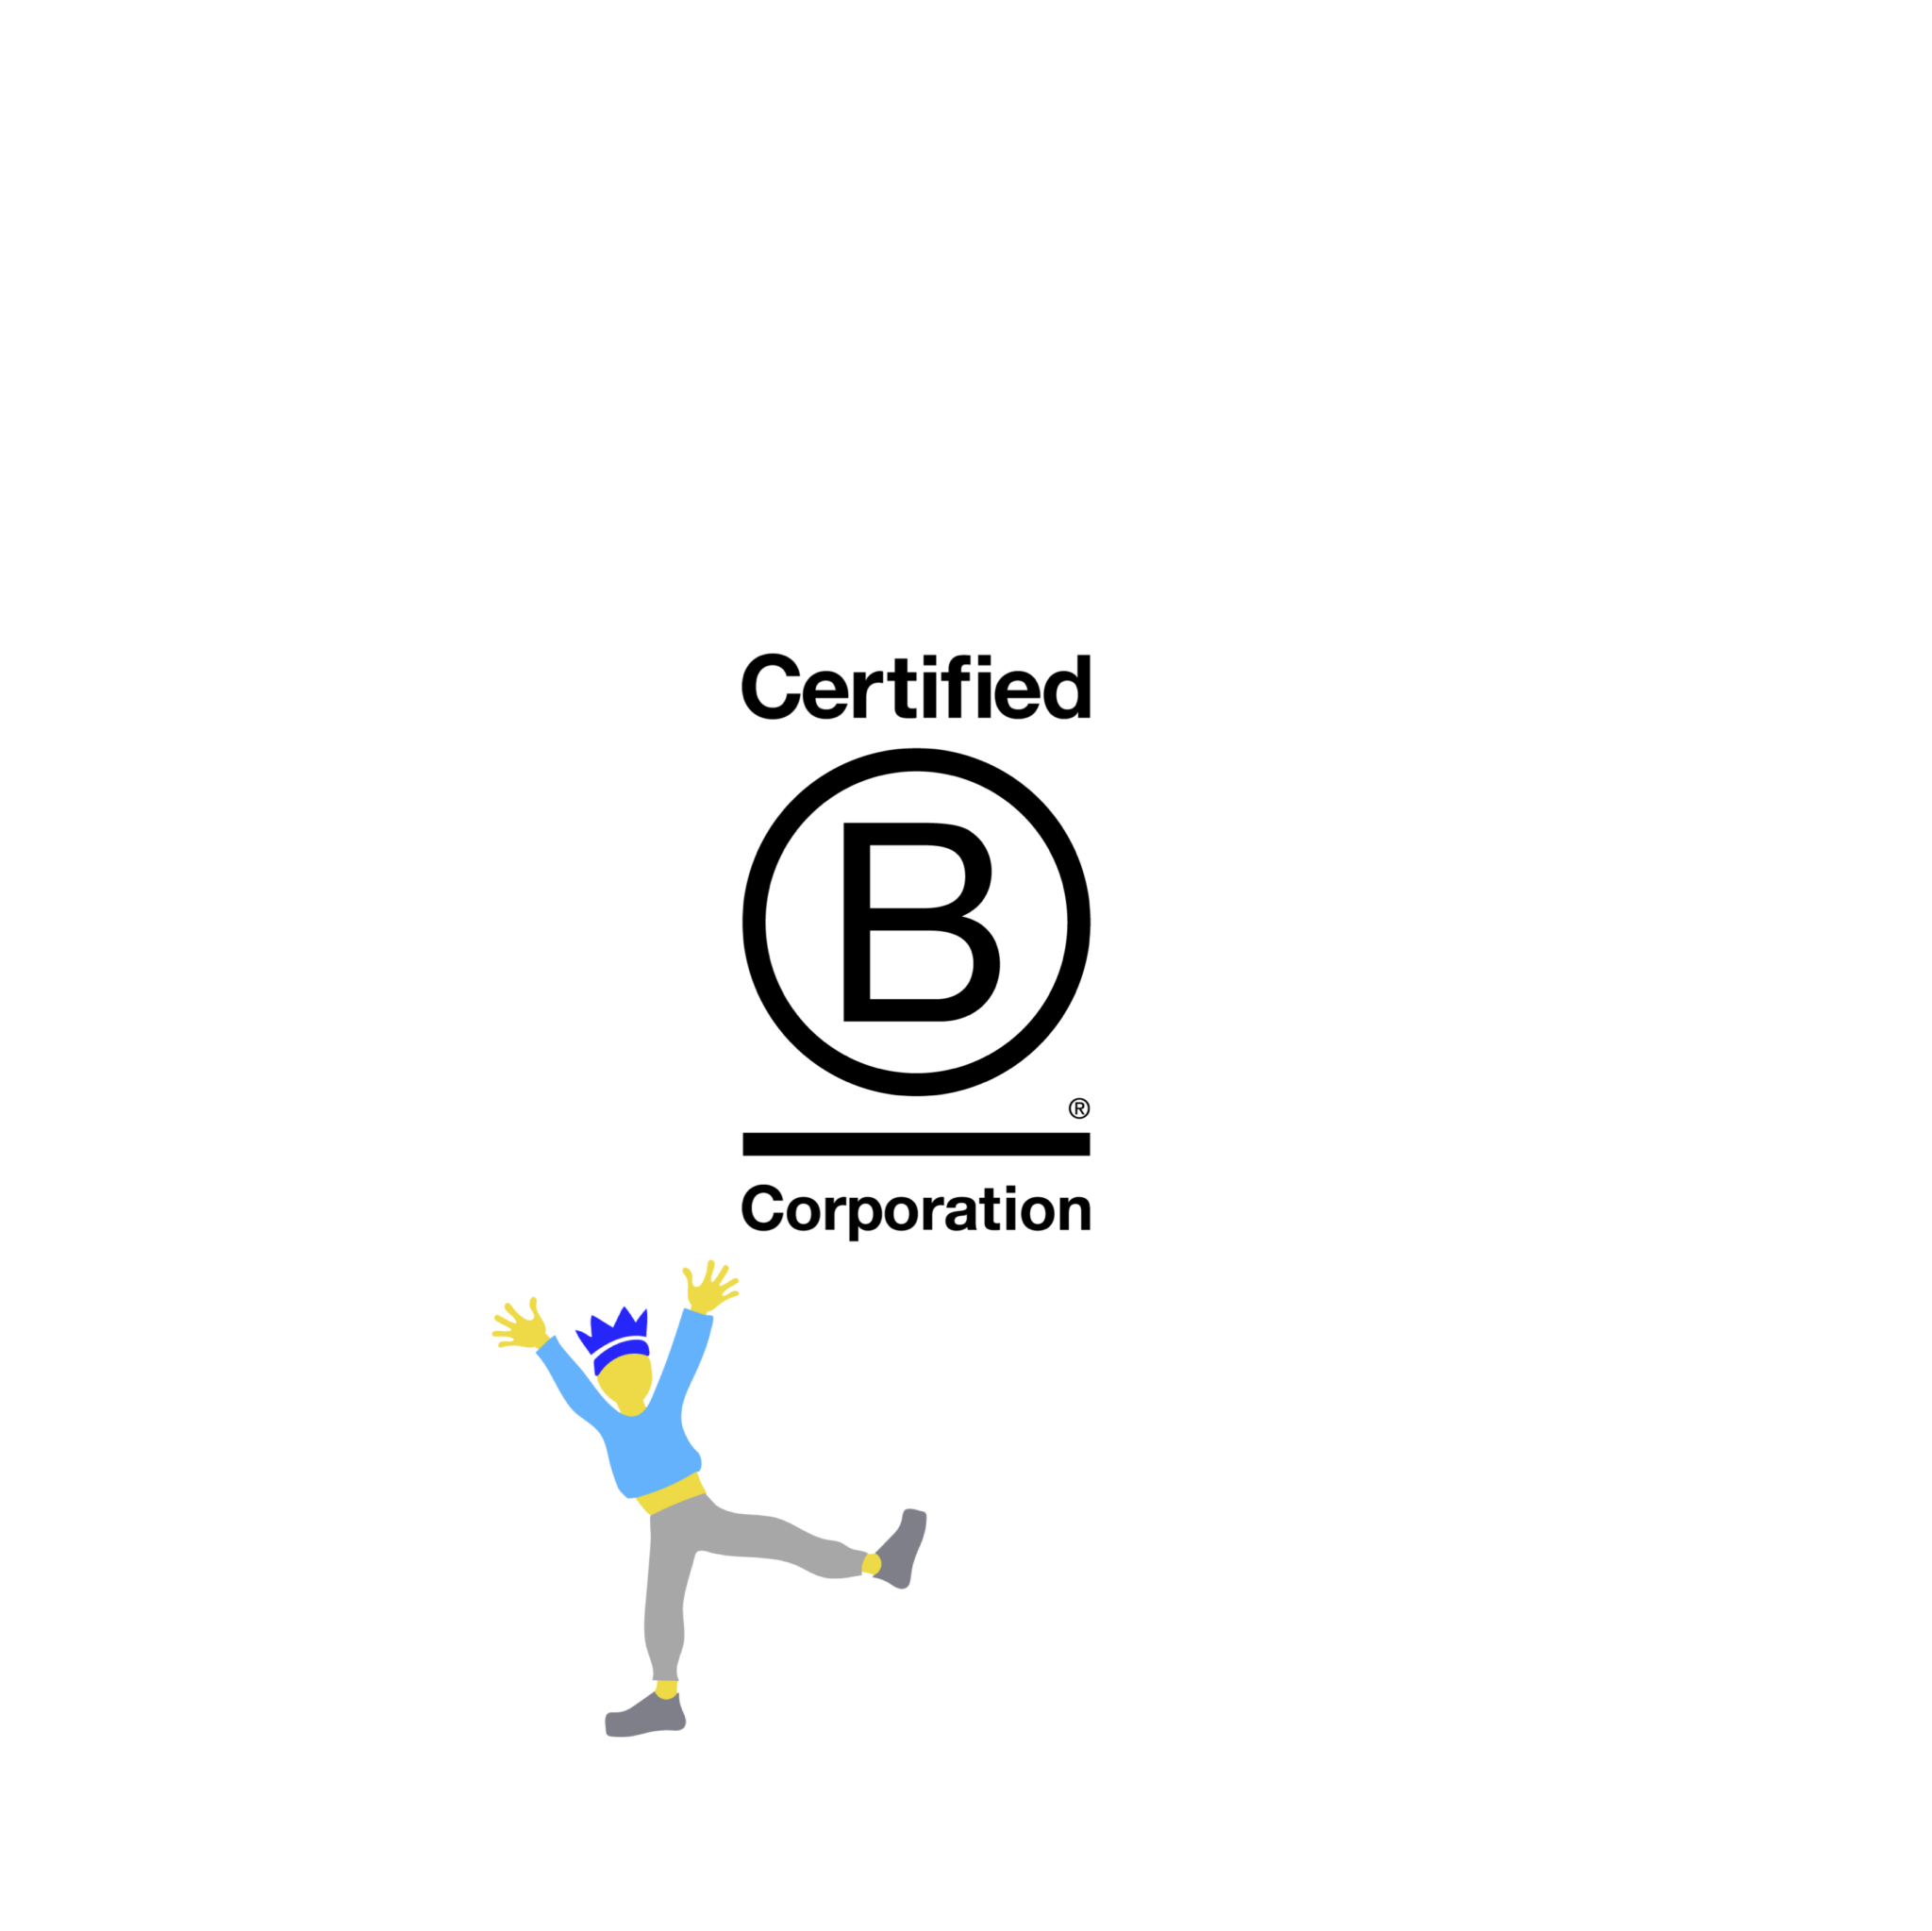 Kids in the Game is officially a B Corp